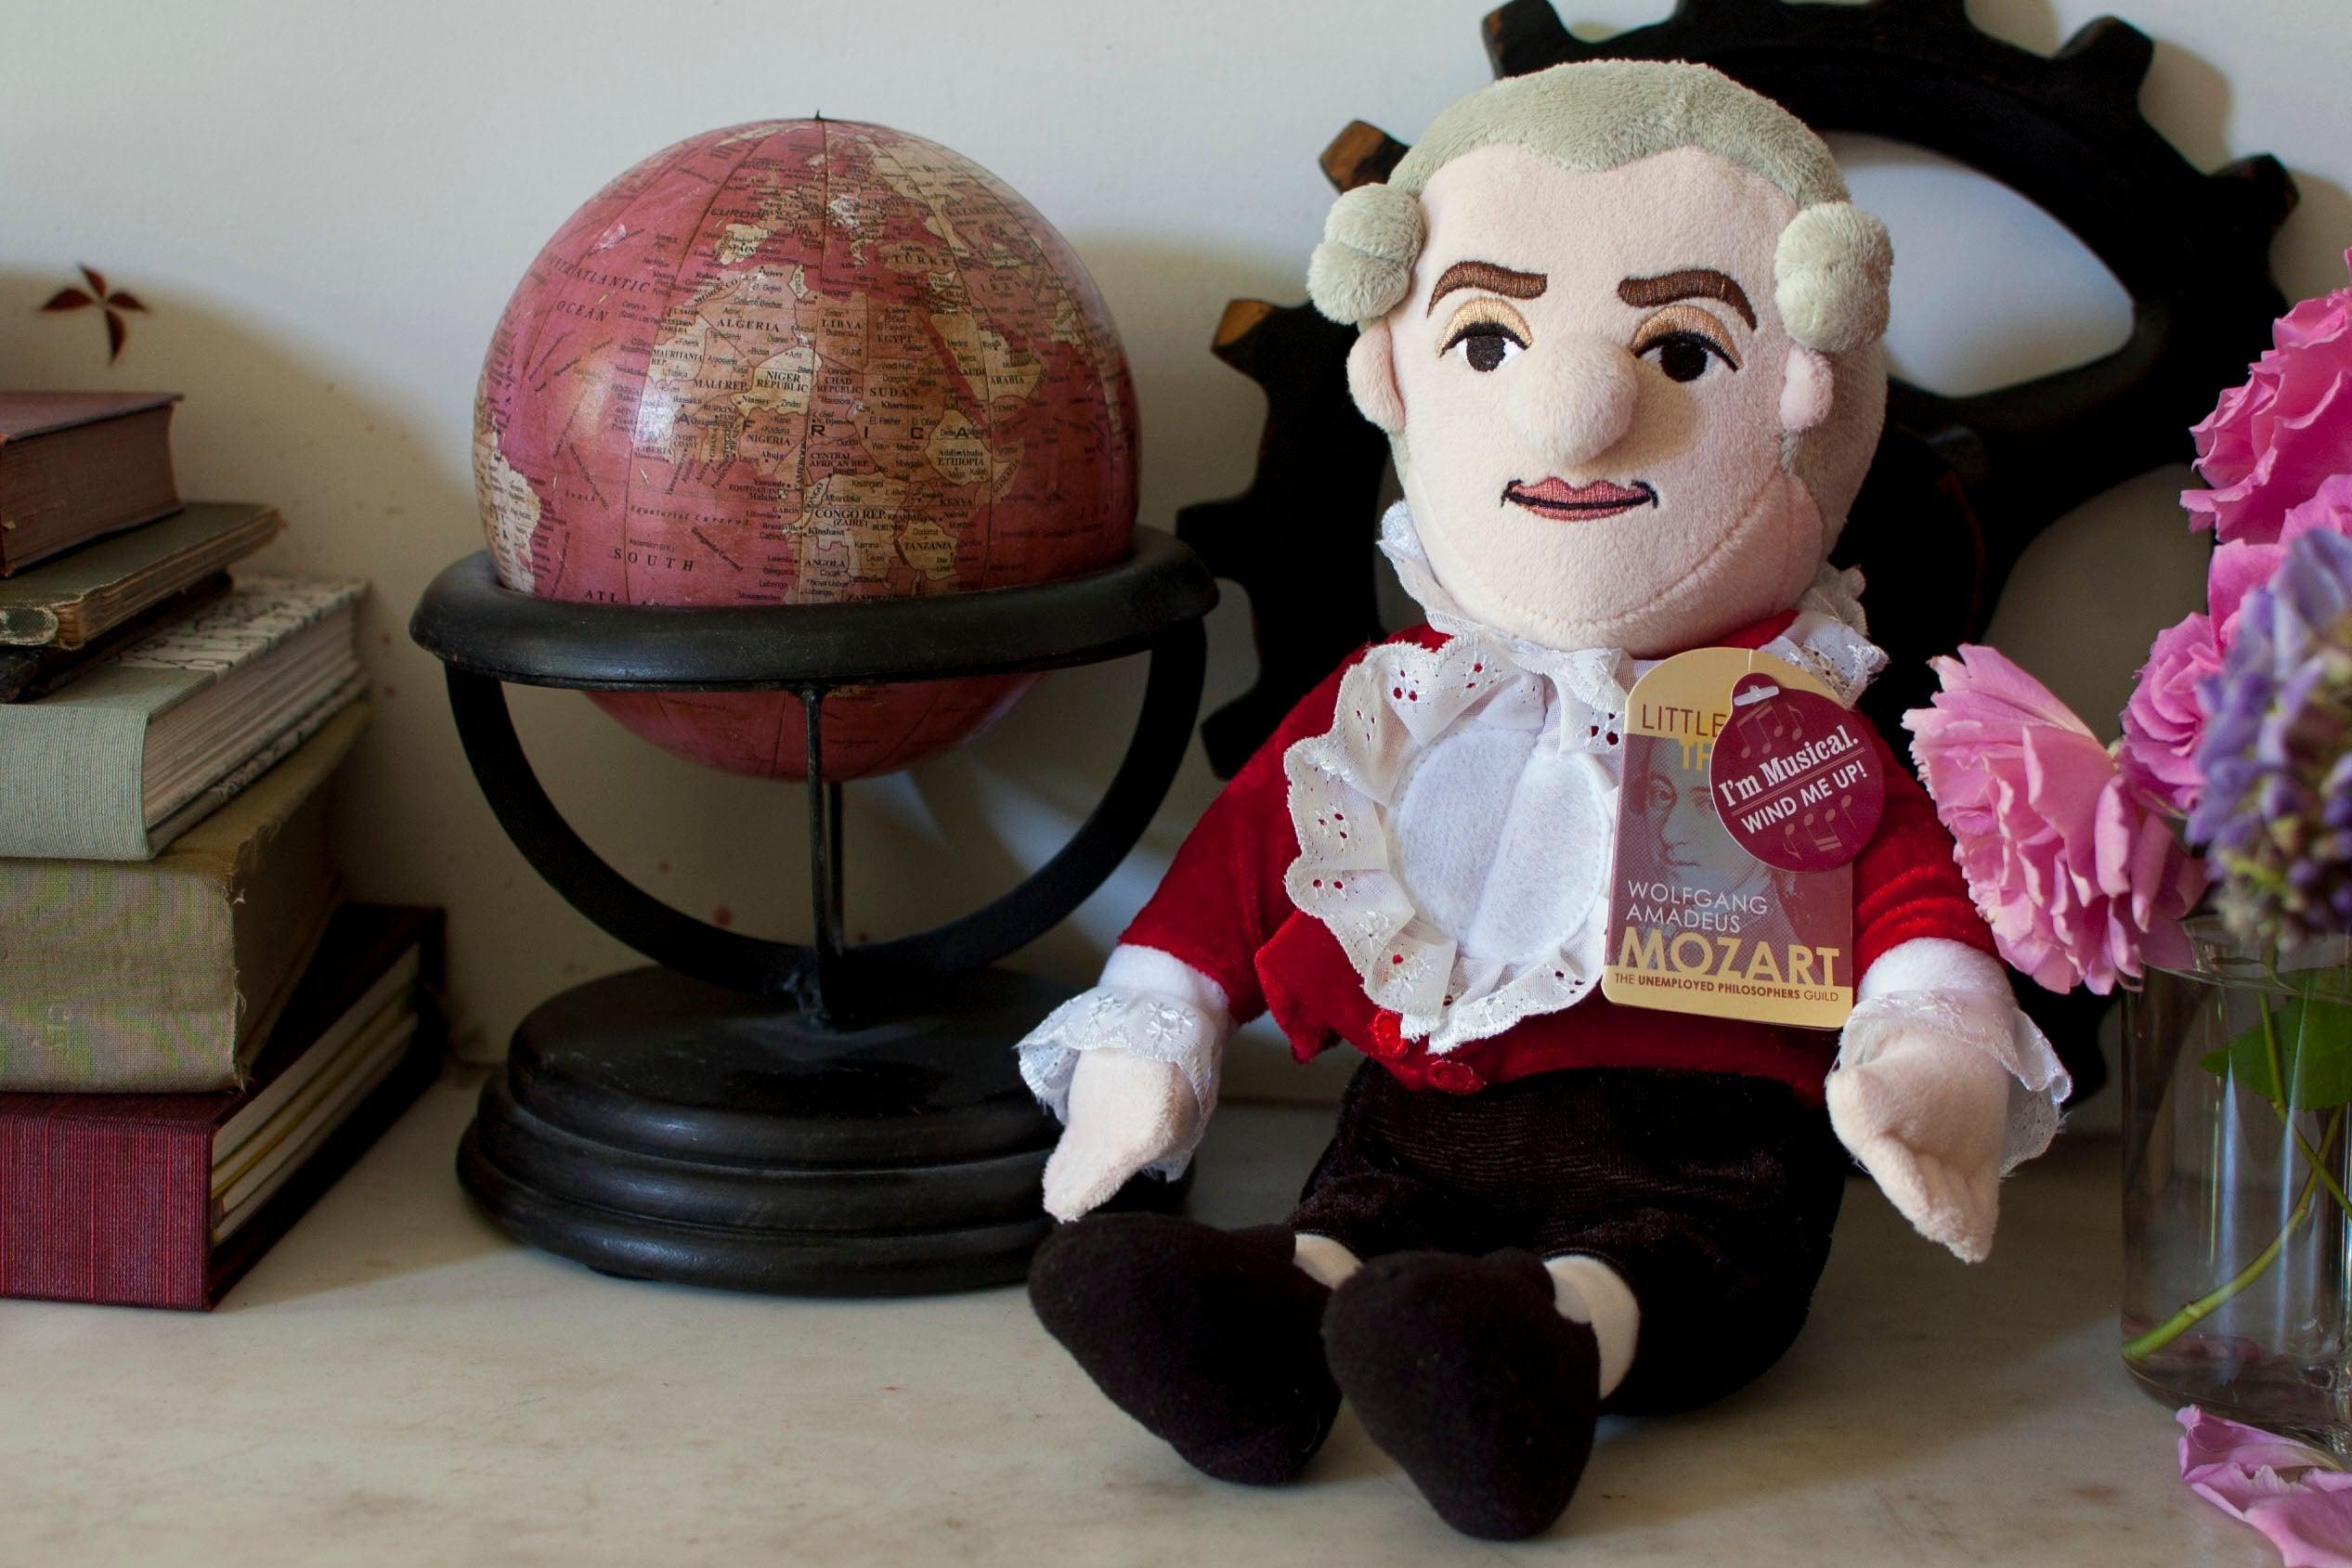 Product photo of Mozart Plush Doll, a novelty gift manufactured by The Unemployed Philosophers Guild.